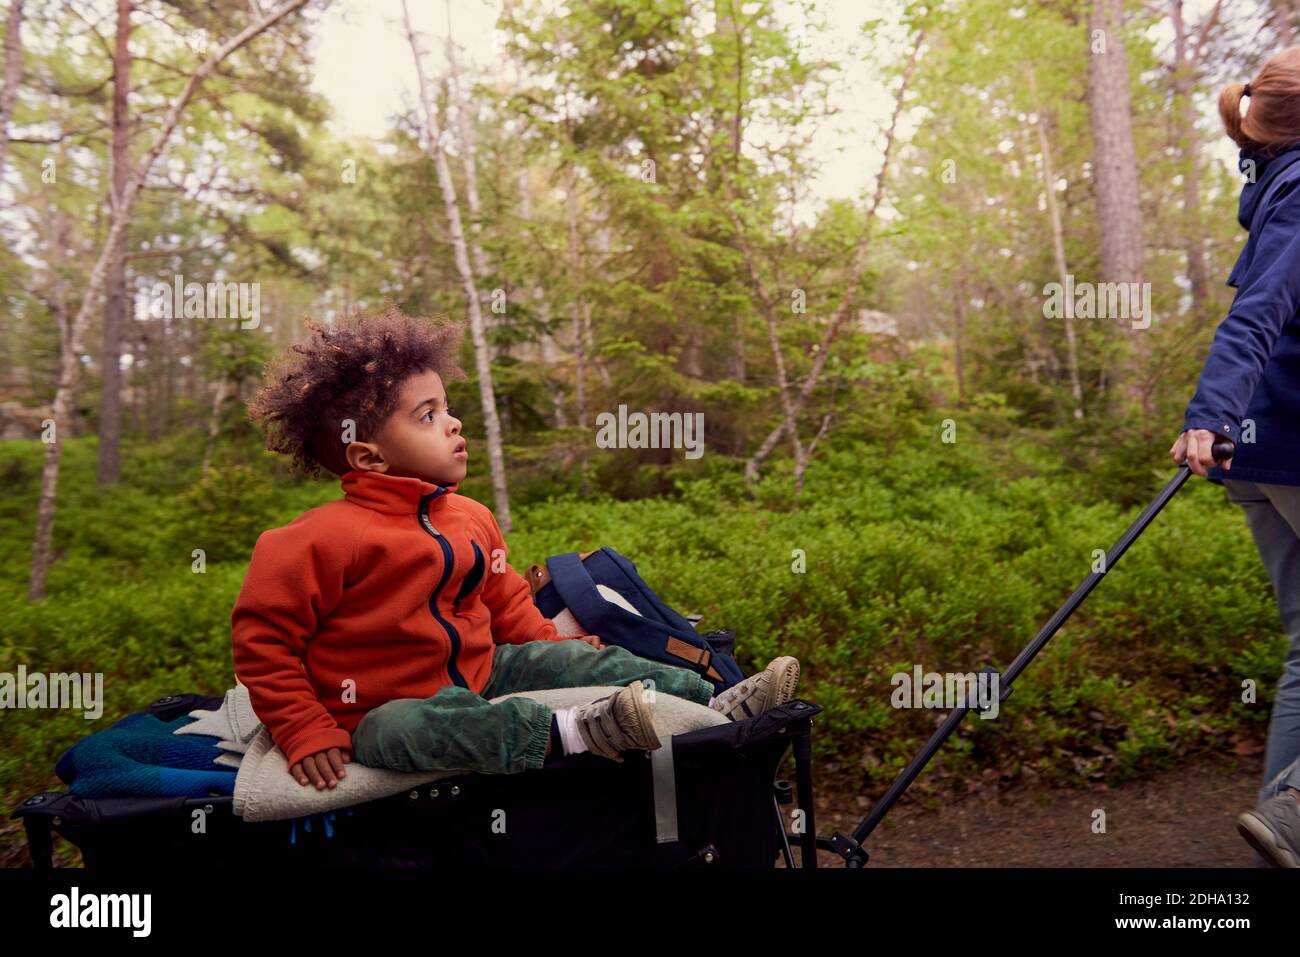 Mother pulling boy sitting on camping cart against trees in forest Stock Photo